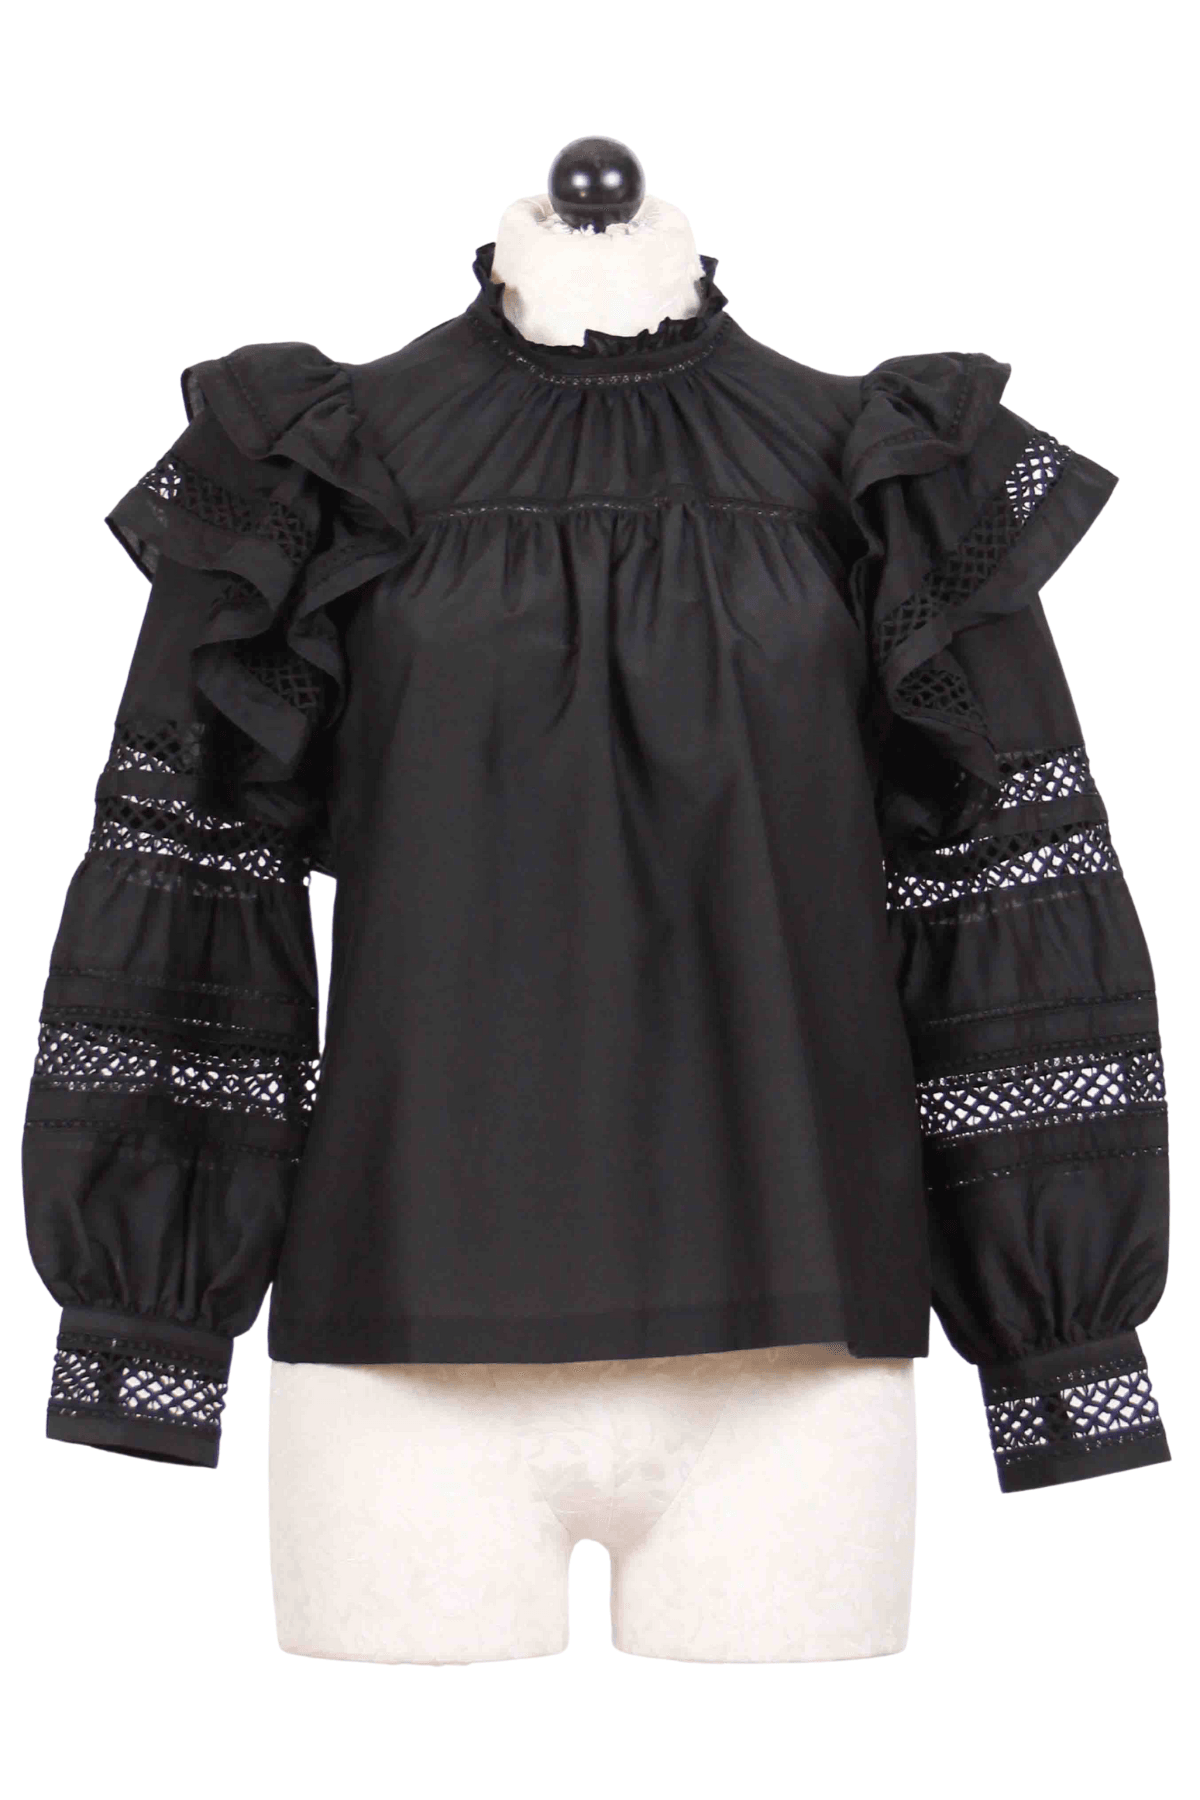 Black Que Blouse by Marie Oliver